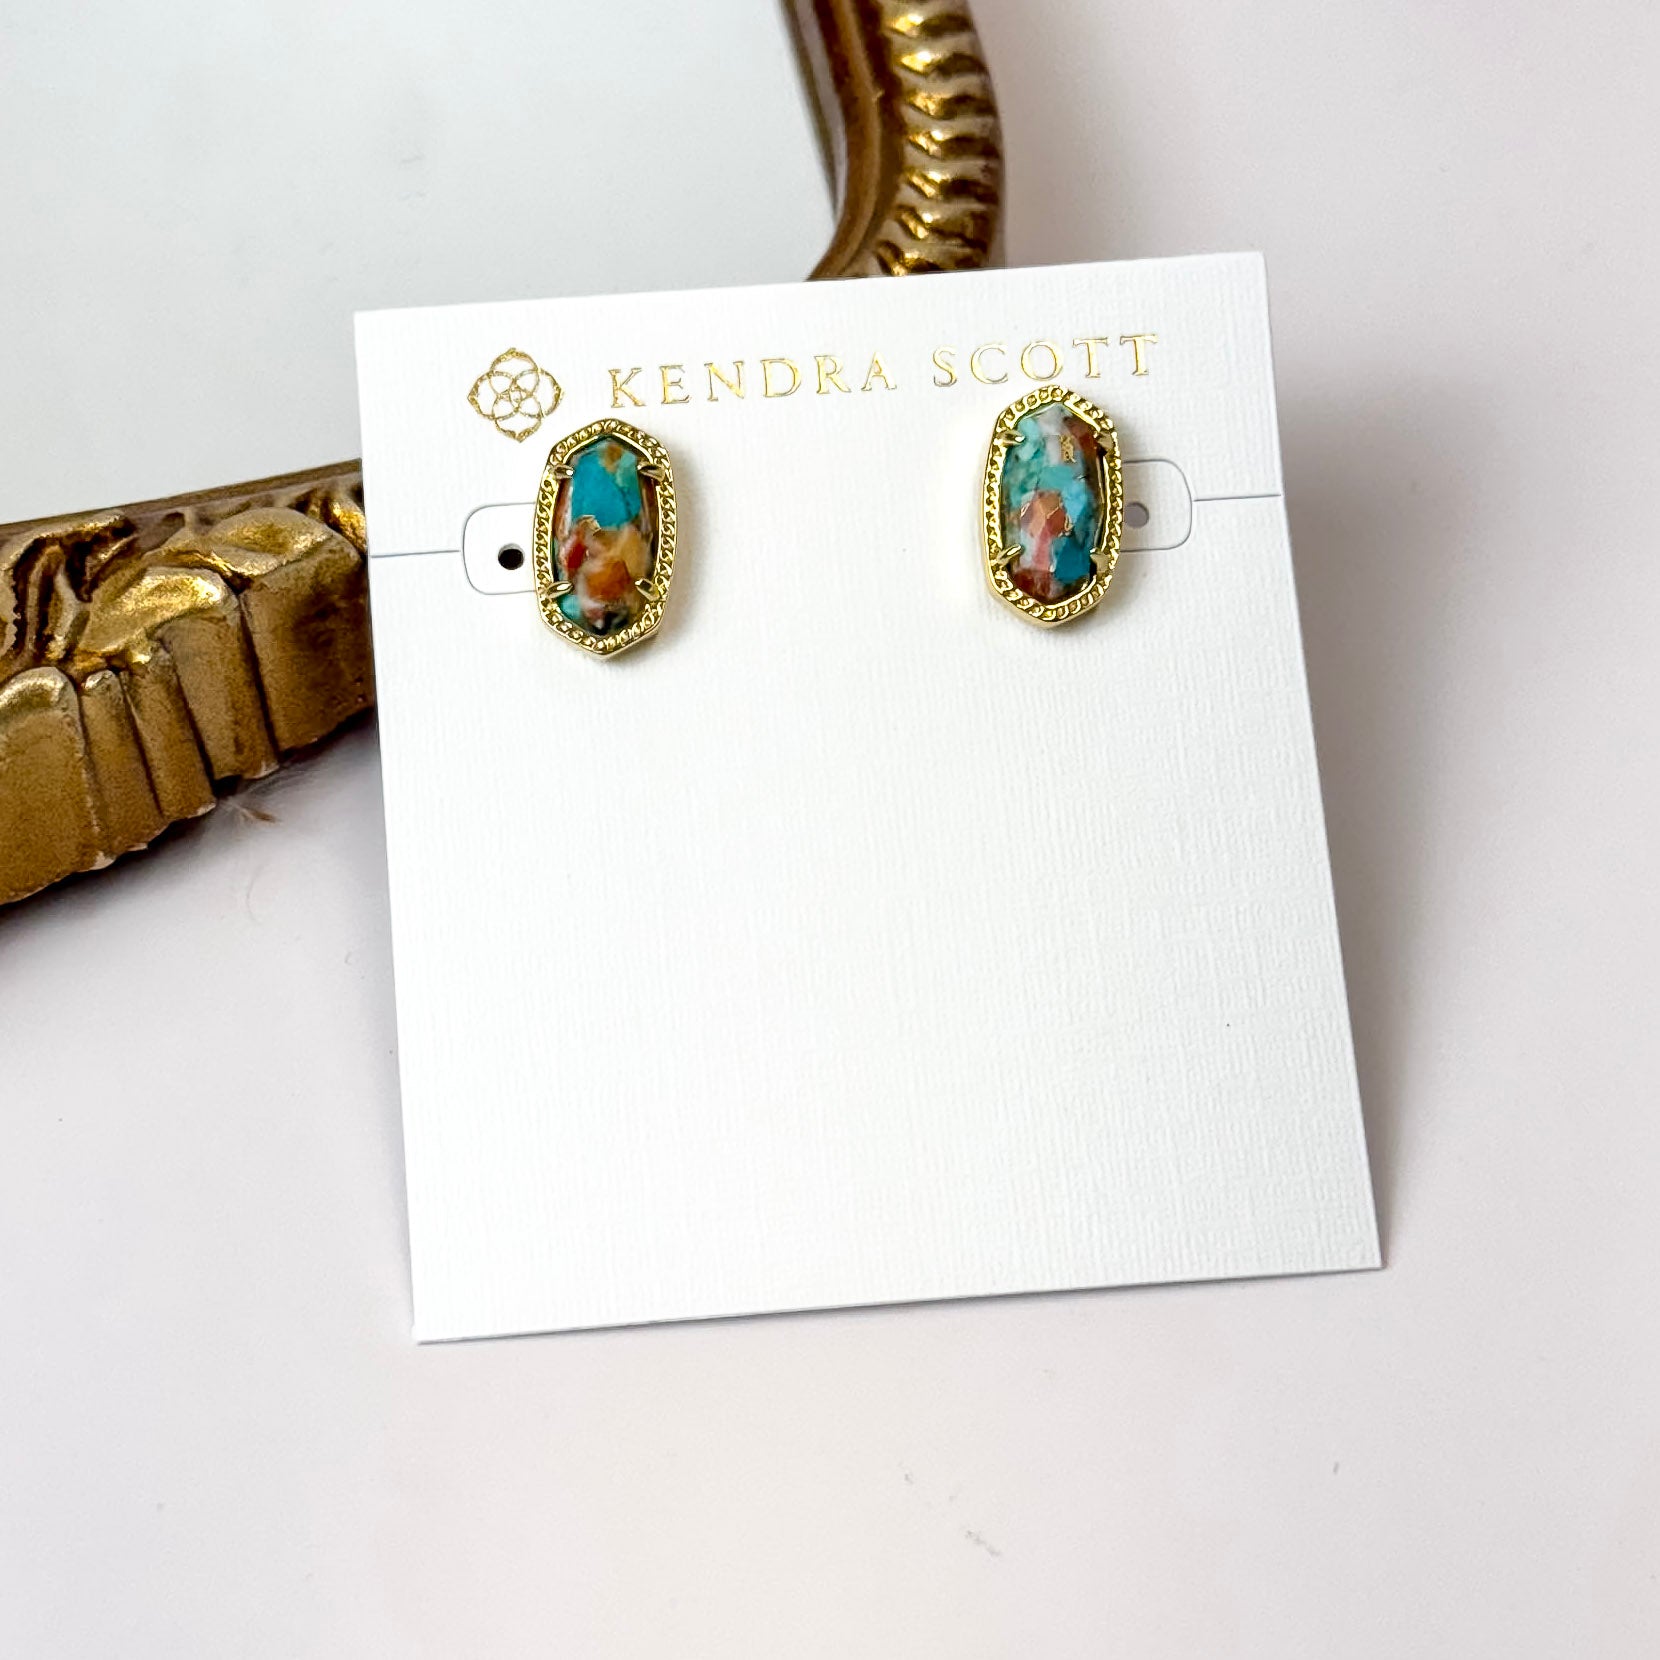 Kendra Scott | Ellie Gold Stud Earrings in Bronze Veined Turquoise Red Oyster - Giddy Up Glamour Boutique